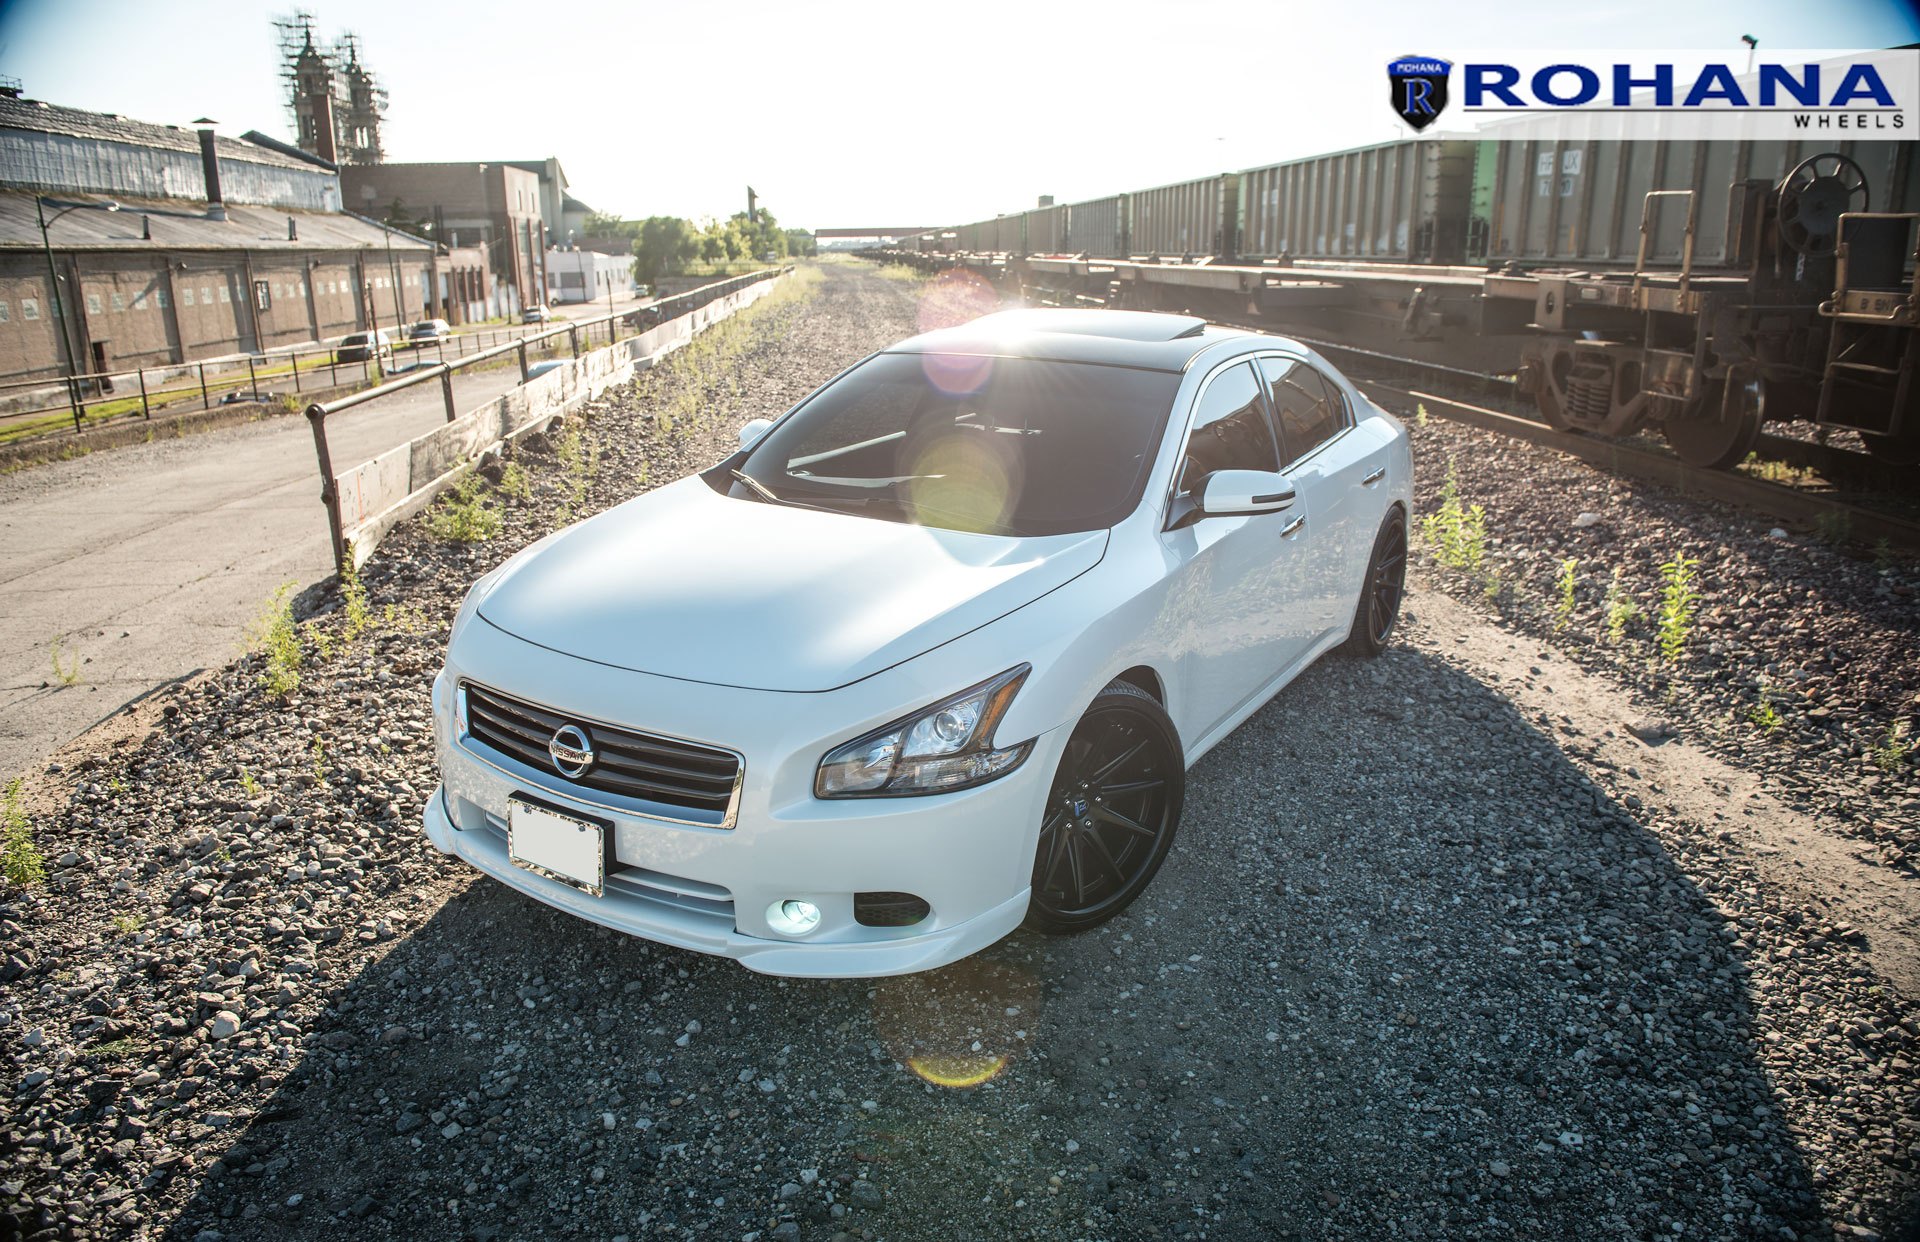 Gorgeous White Nissan Maxima With Perfectly Fitted Rohana Wheels - Photo by Rohana Wheels